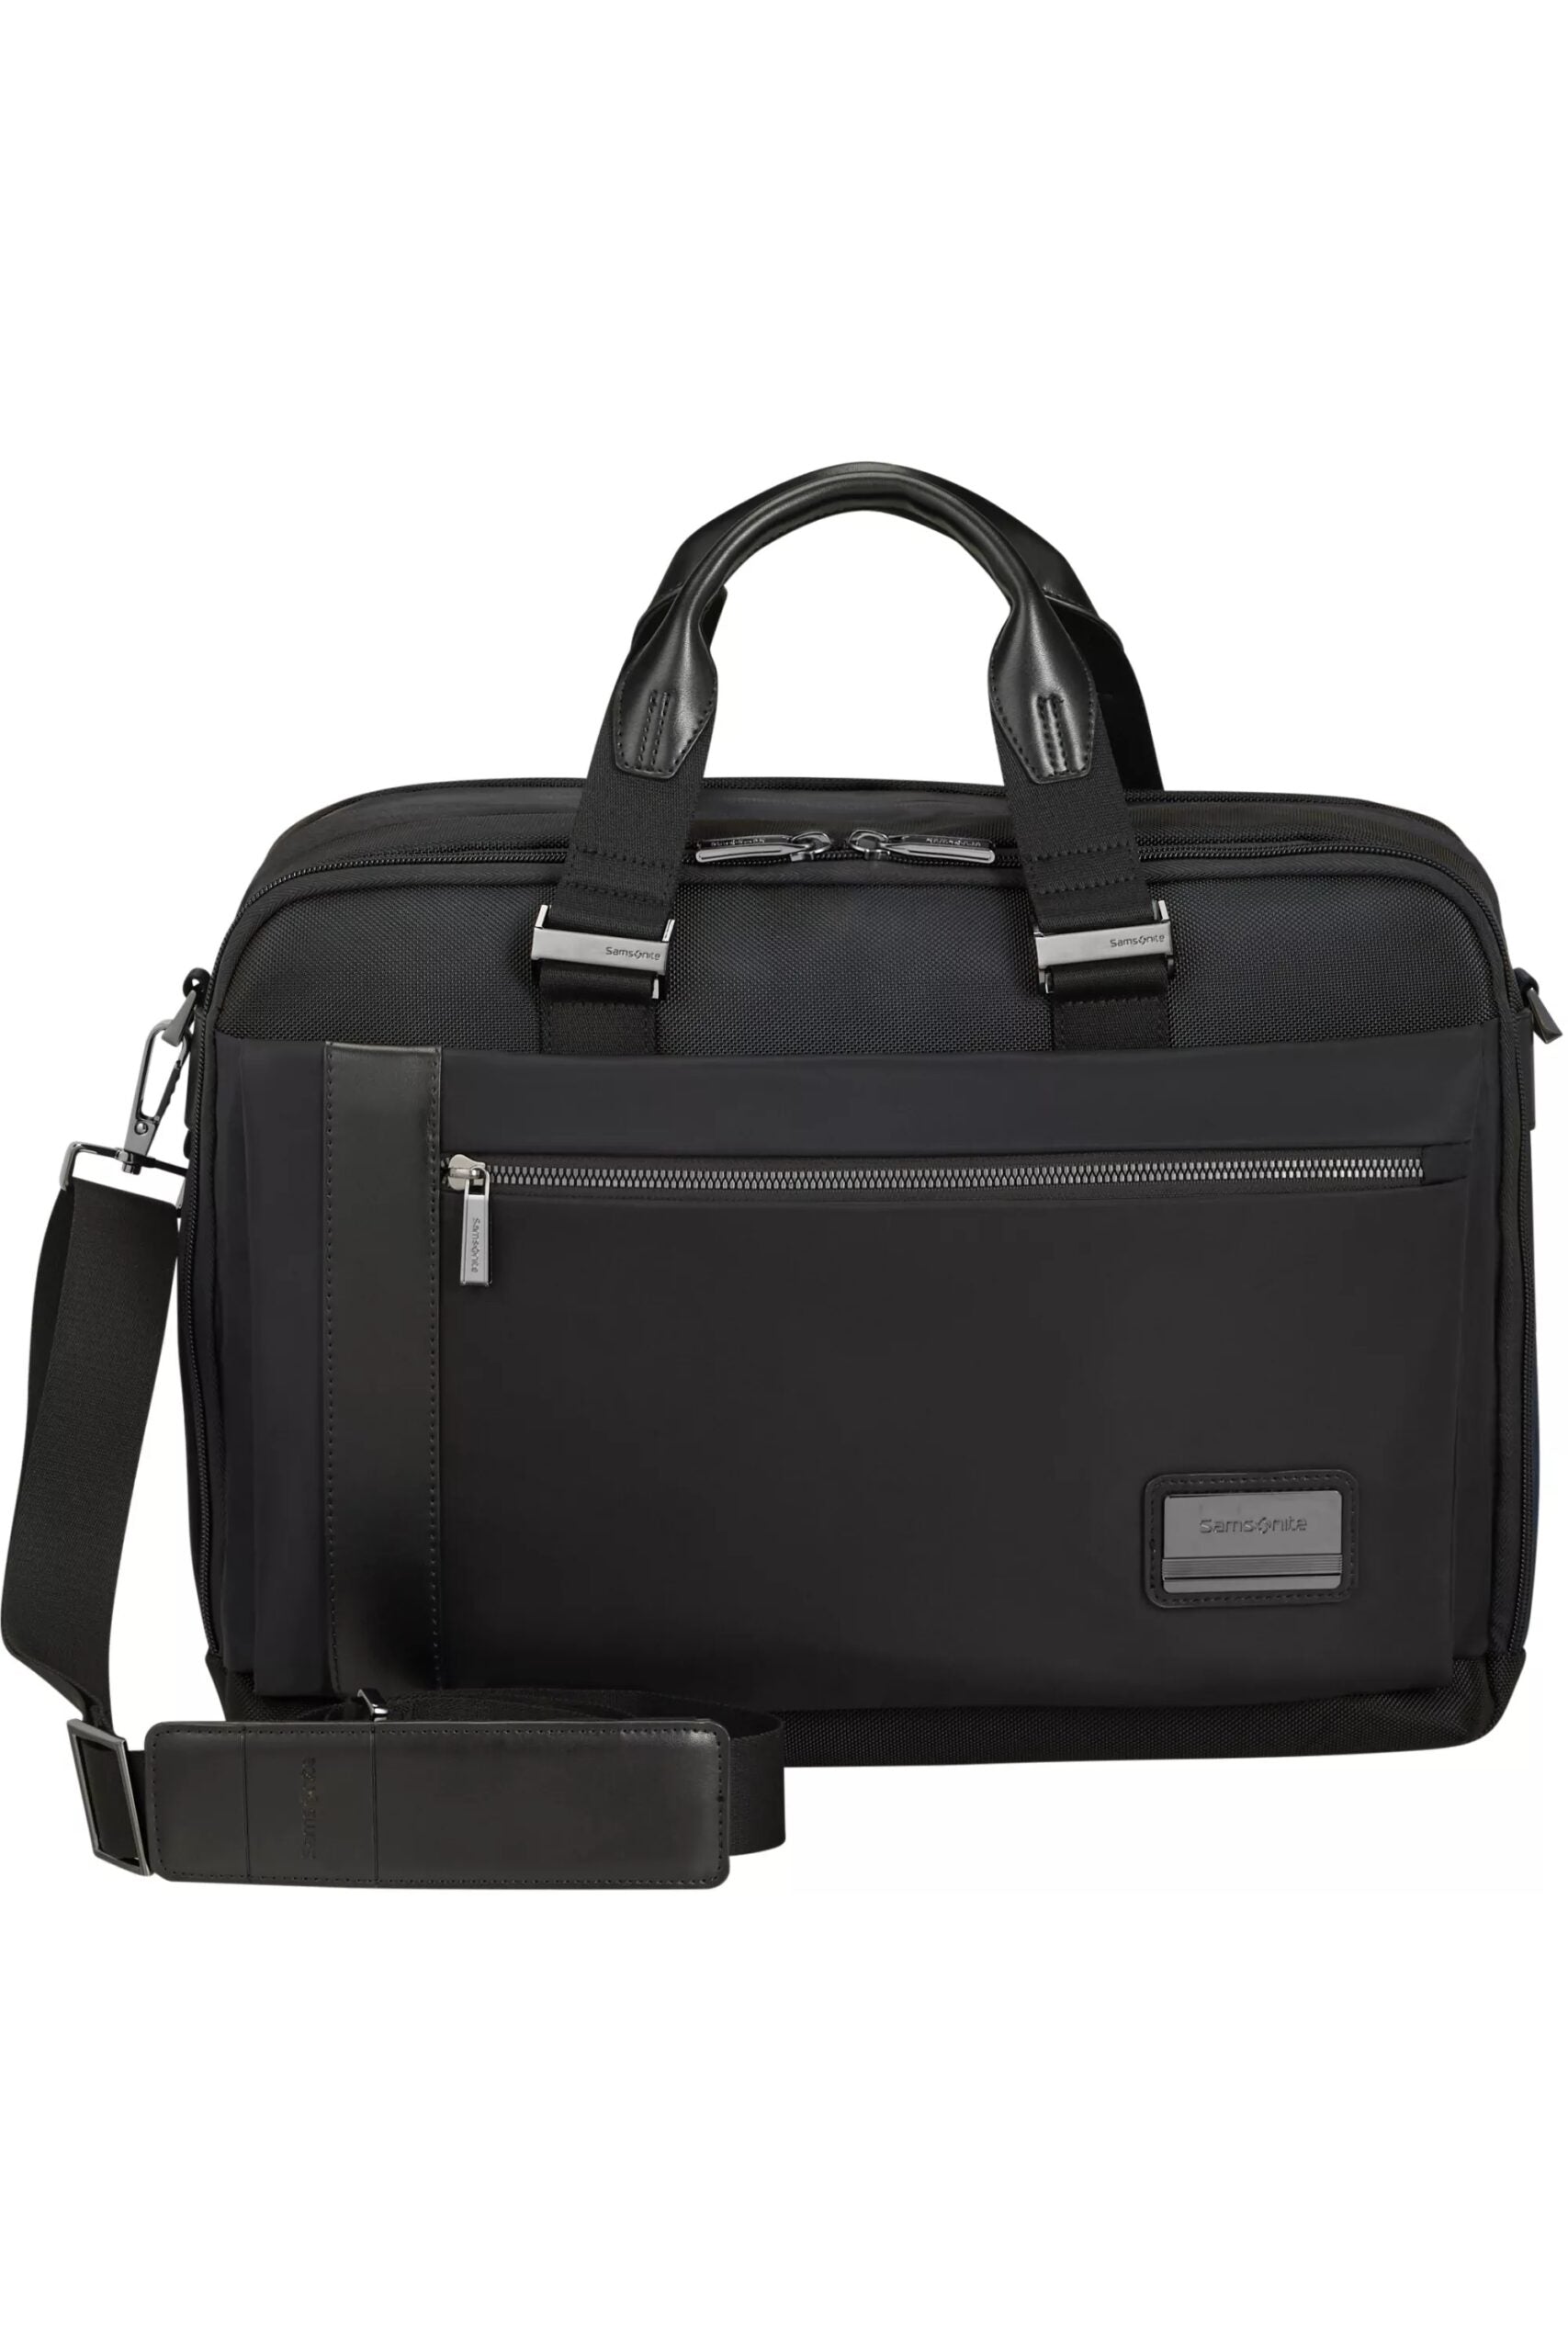 Openroad briefcase 14.6 1